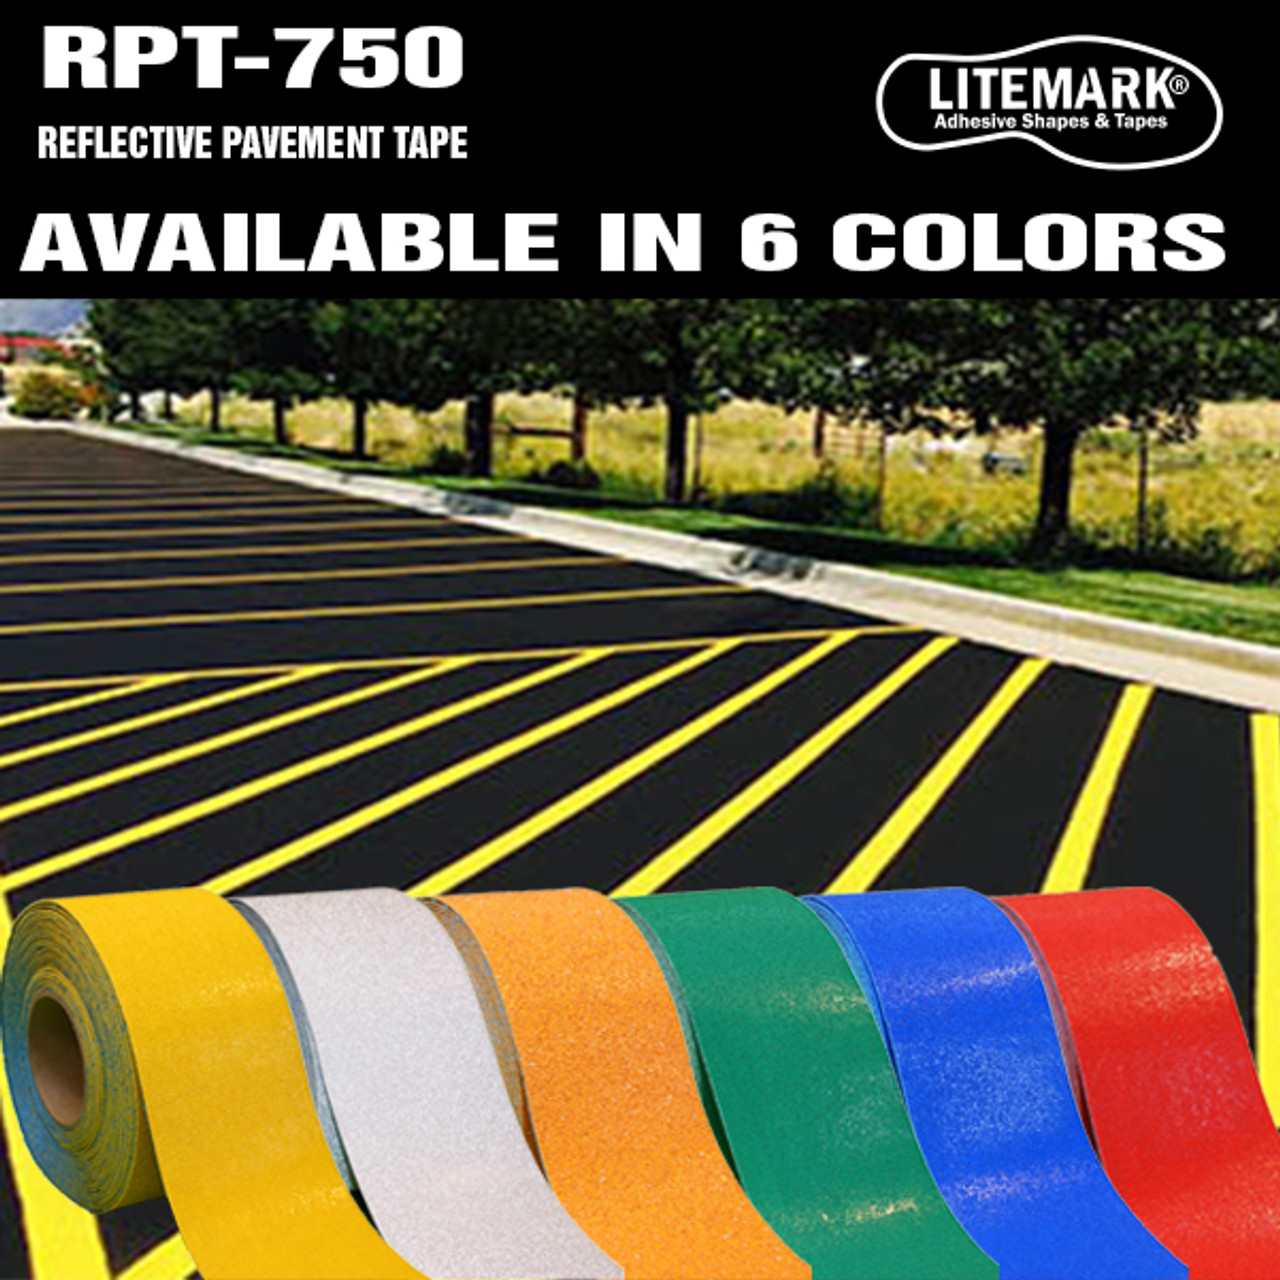 Green RPT-750 Reflective High Durability Concrete and Pavement Marking Tape